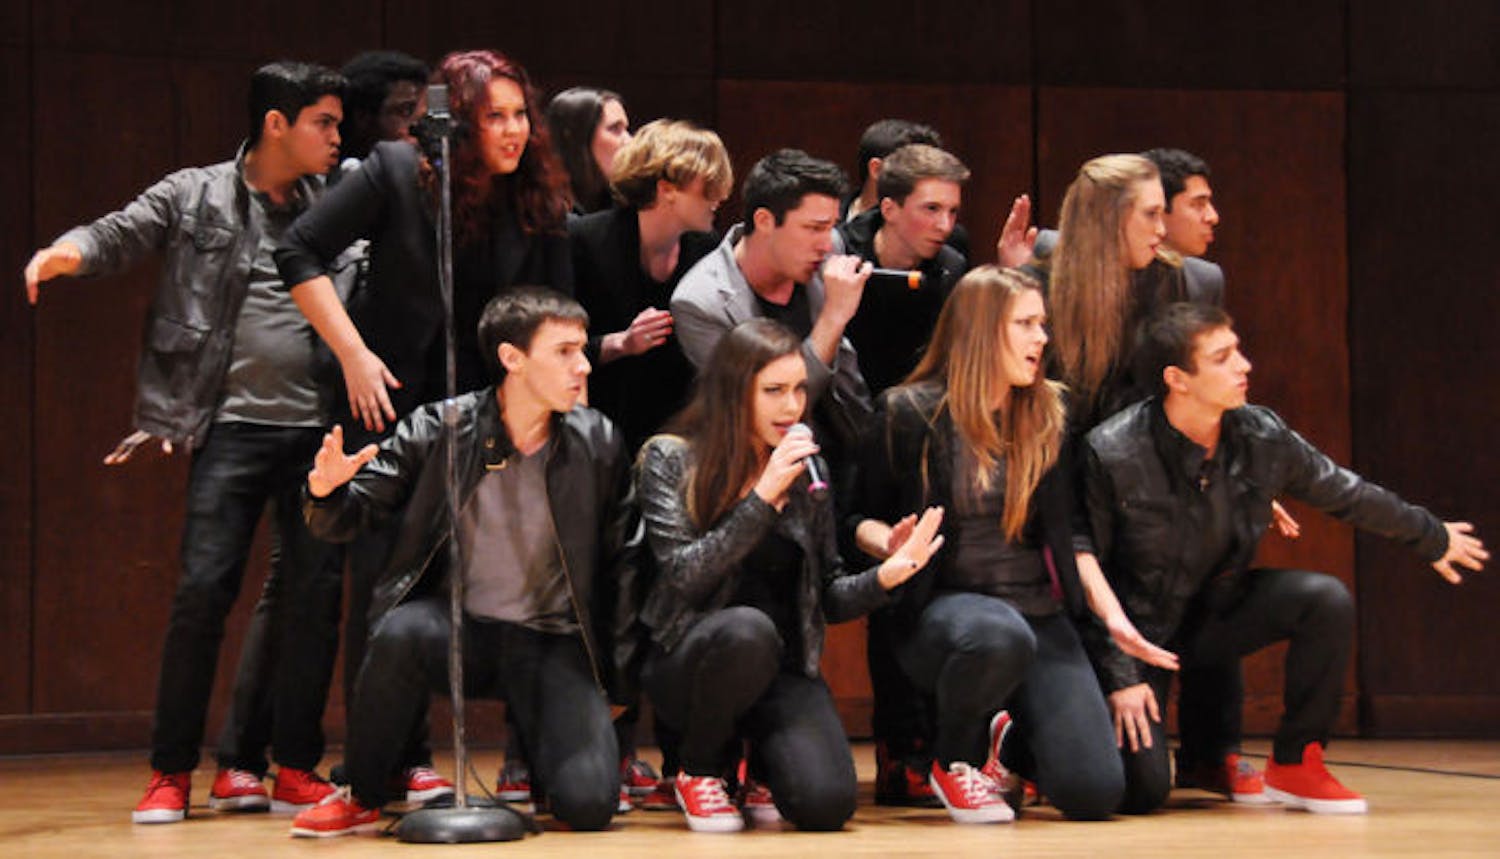 UF’s coed a cappella group, No Southern Accent, performs at the 2013 International Championship of Collegiate A Cappella on Saturday at the University Auditorium. NSA placed third out of eight a cappella groups competing.